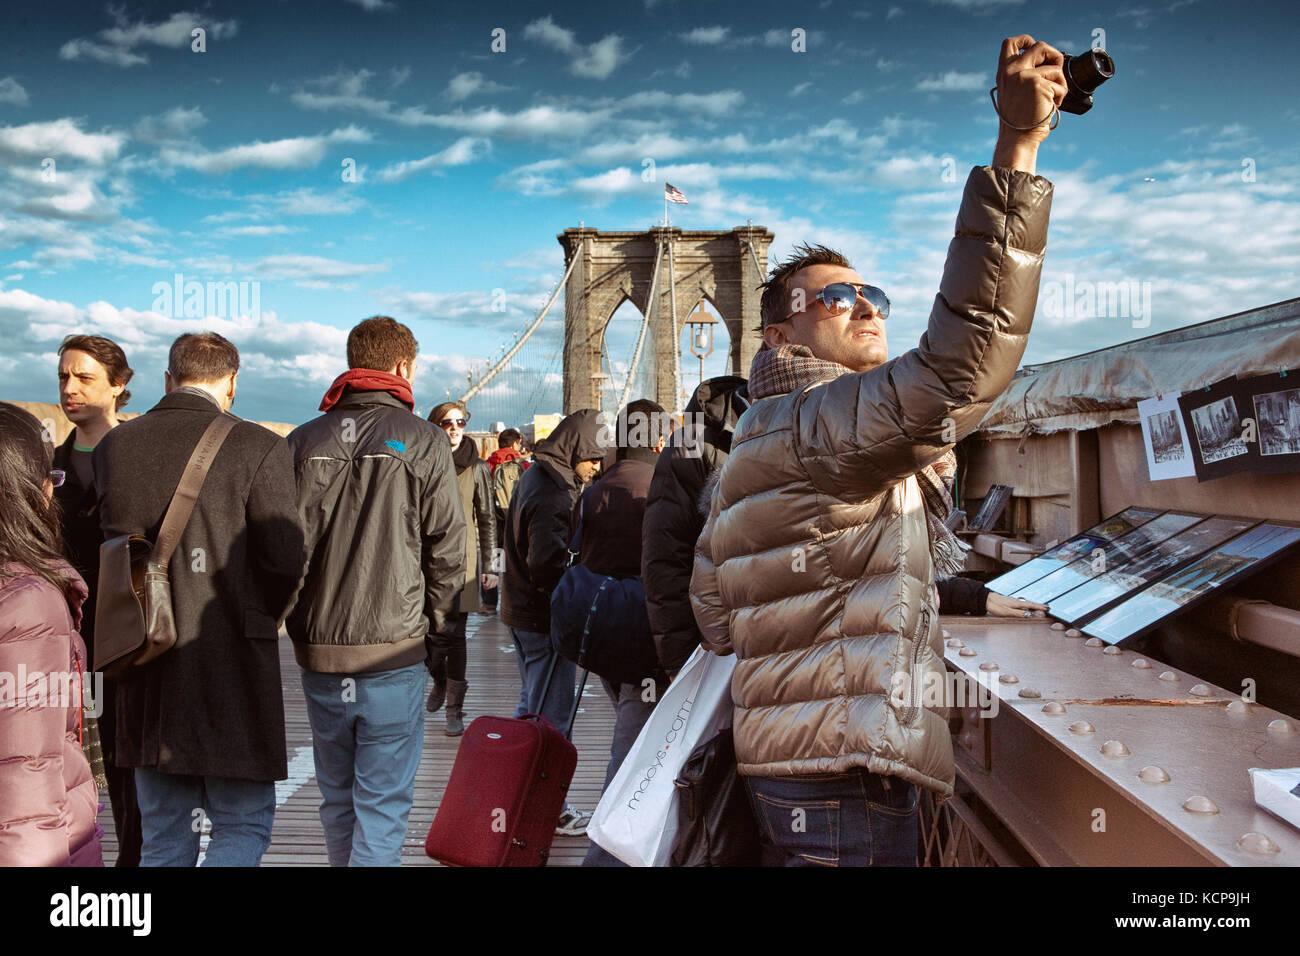 The crowds enjoying the Brooklyn Bridge makes for some excellent street photography. Stock Photo